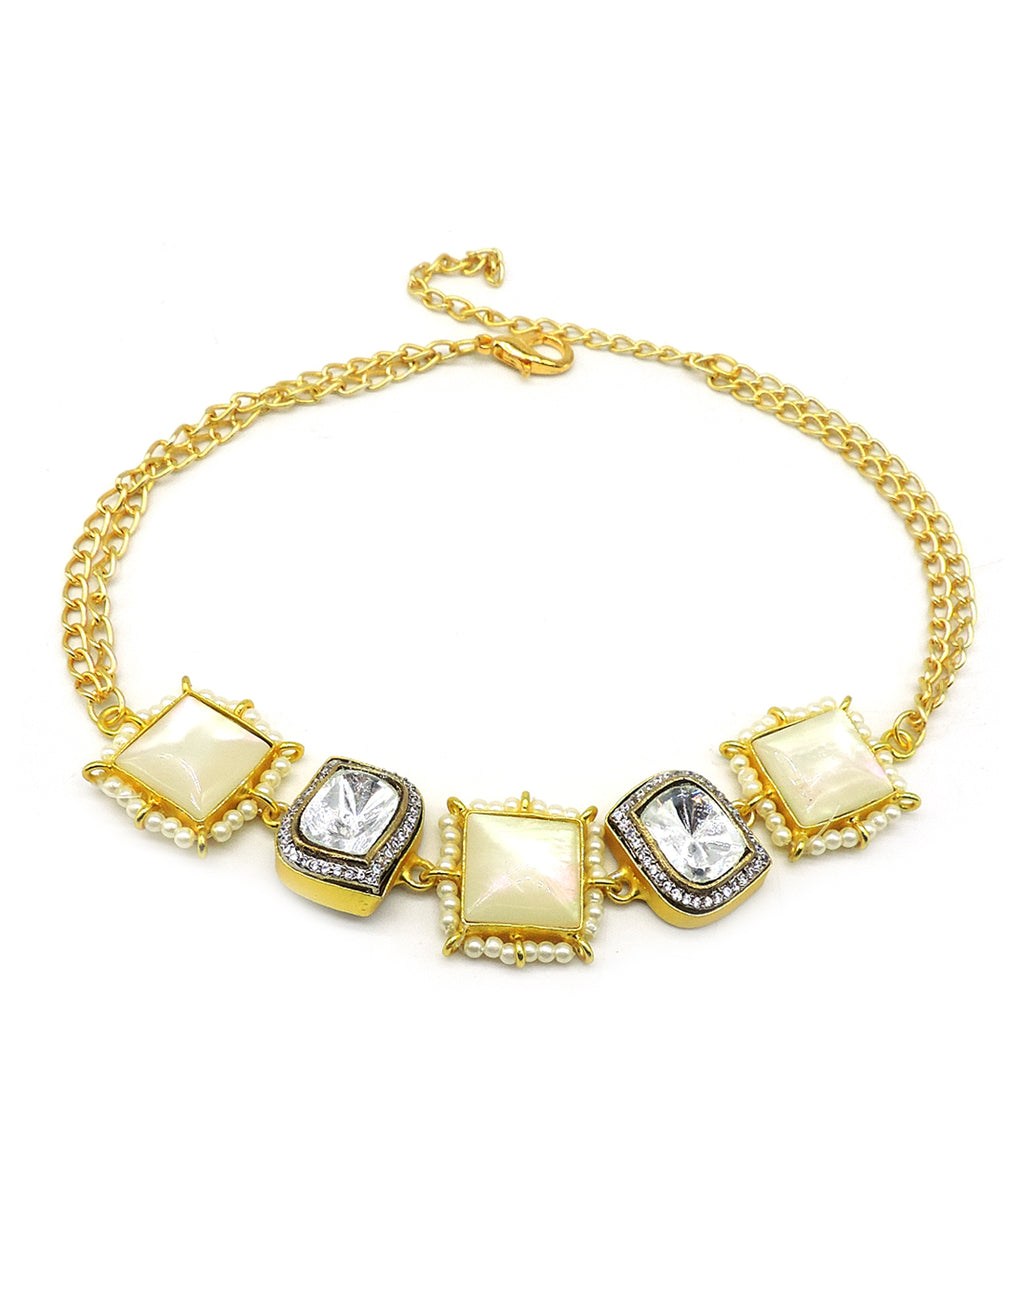 Square Crystal & Shell Necklace - Statement Necklaces - Gold-Plated & Hypoallergenic Jewellery - Made in India - Dubai Jewellery - Dori